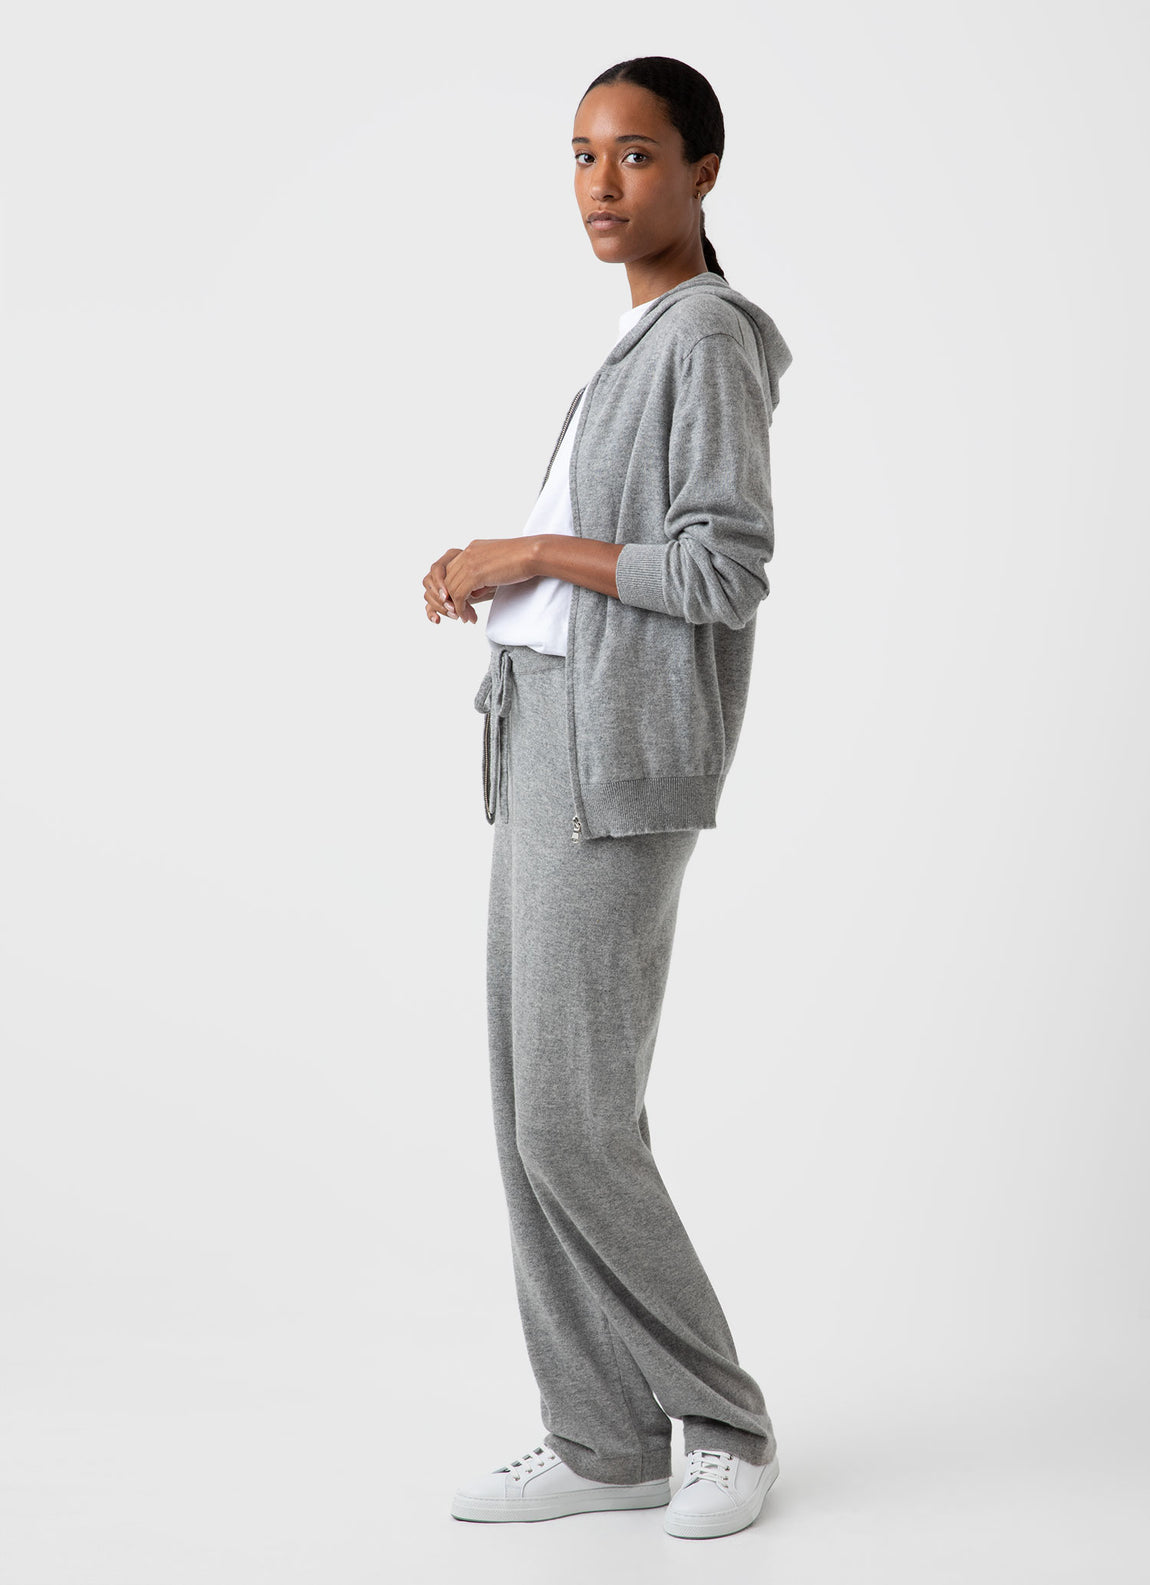 People's Republic of Cashmere Cashmere Sweatpants Ash Grey at CareOfCarl.co